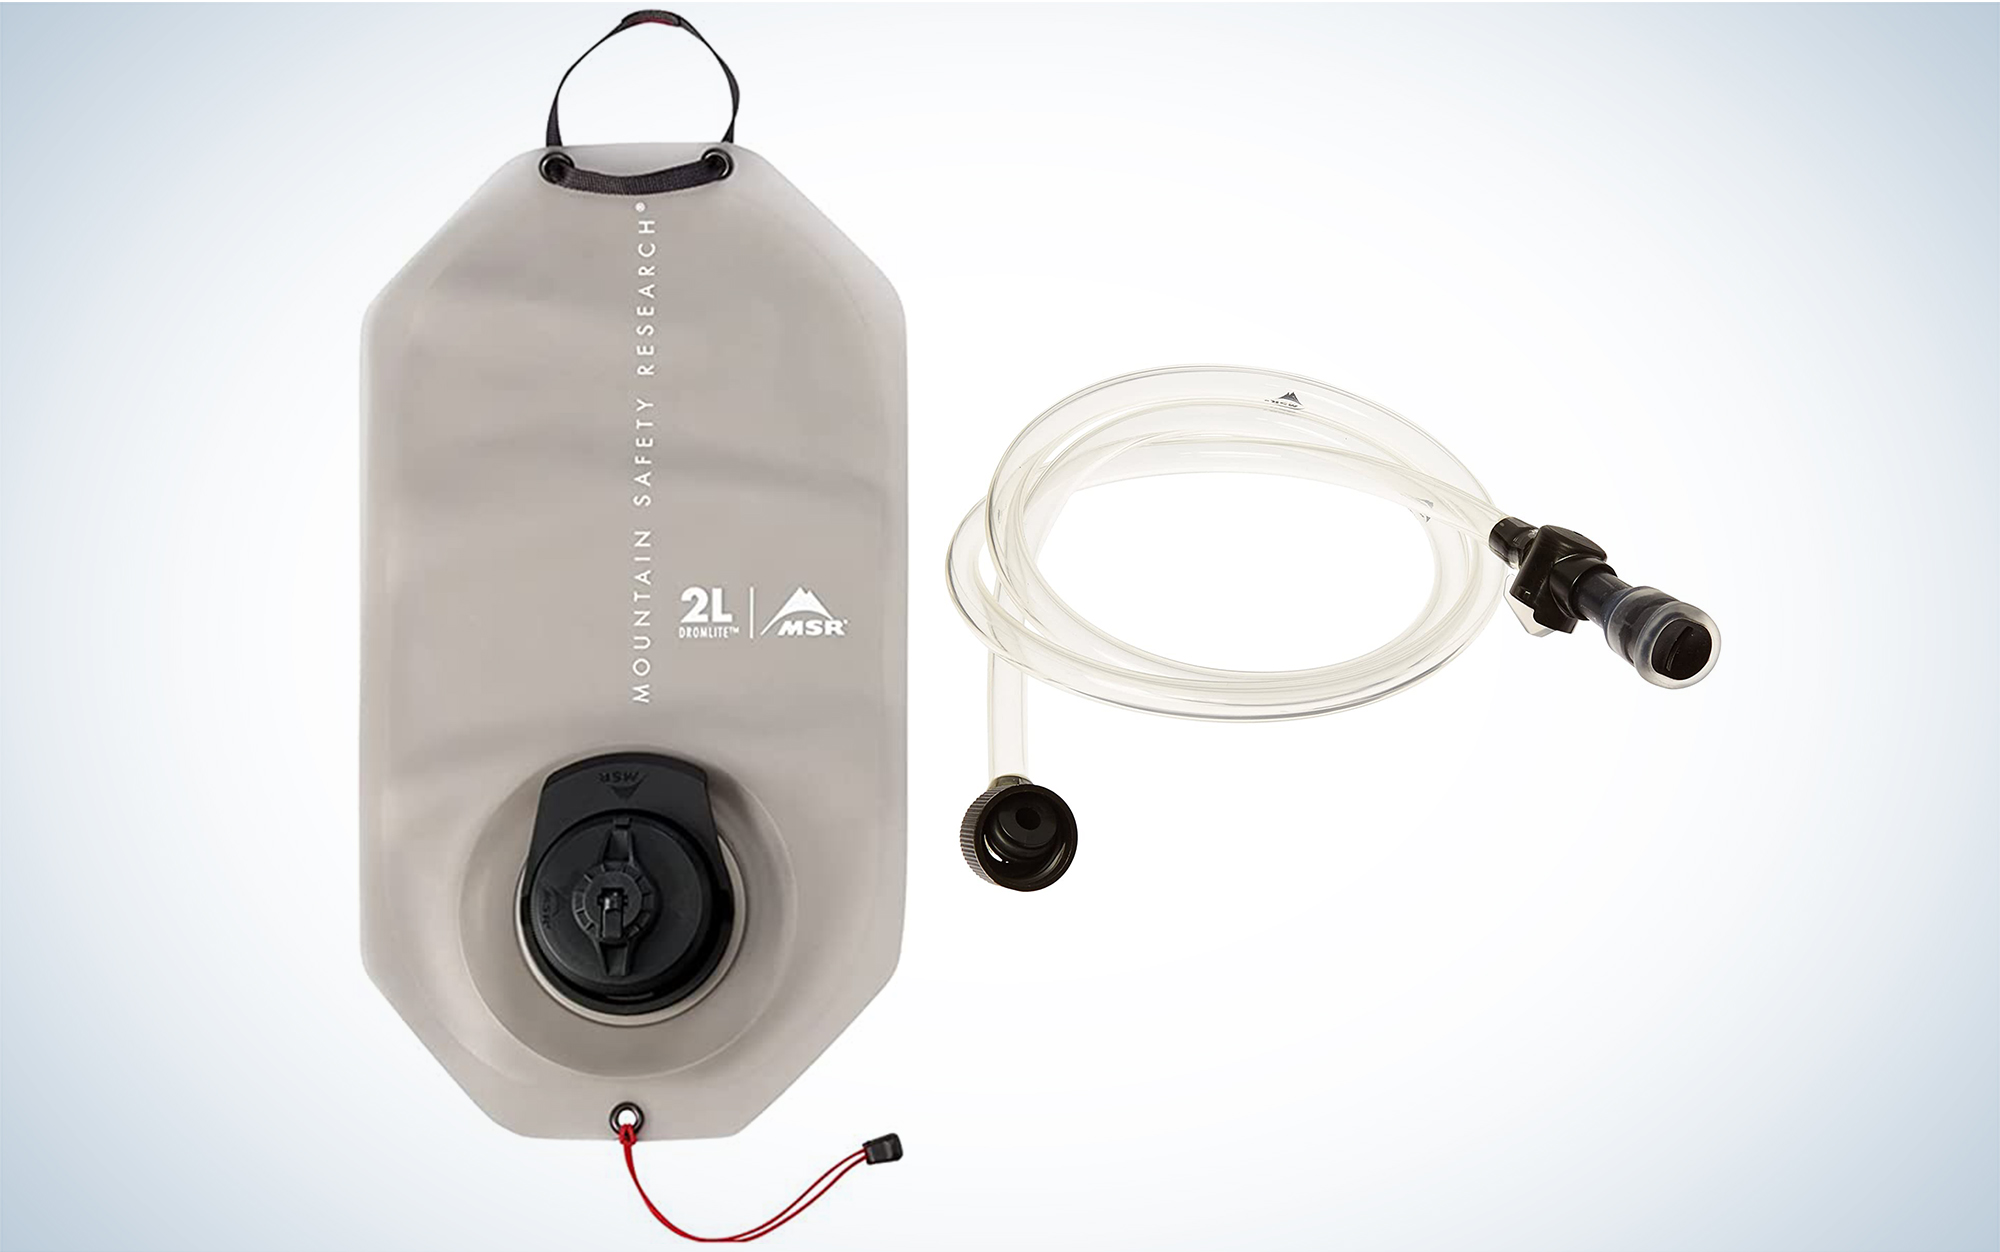 The MSR DromLite Bag and Hydration Kit is the best hydration bladder for camping.